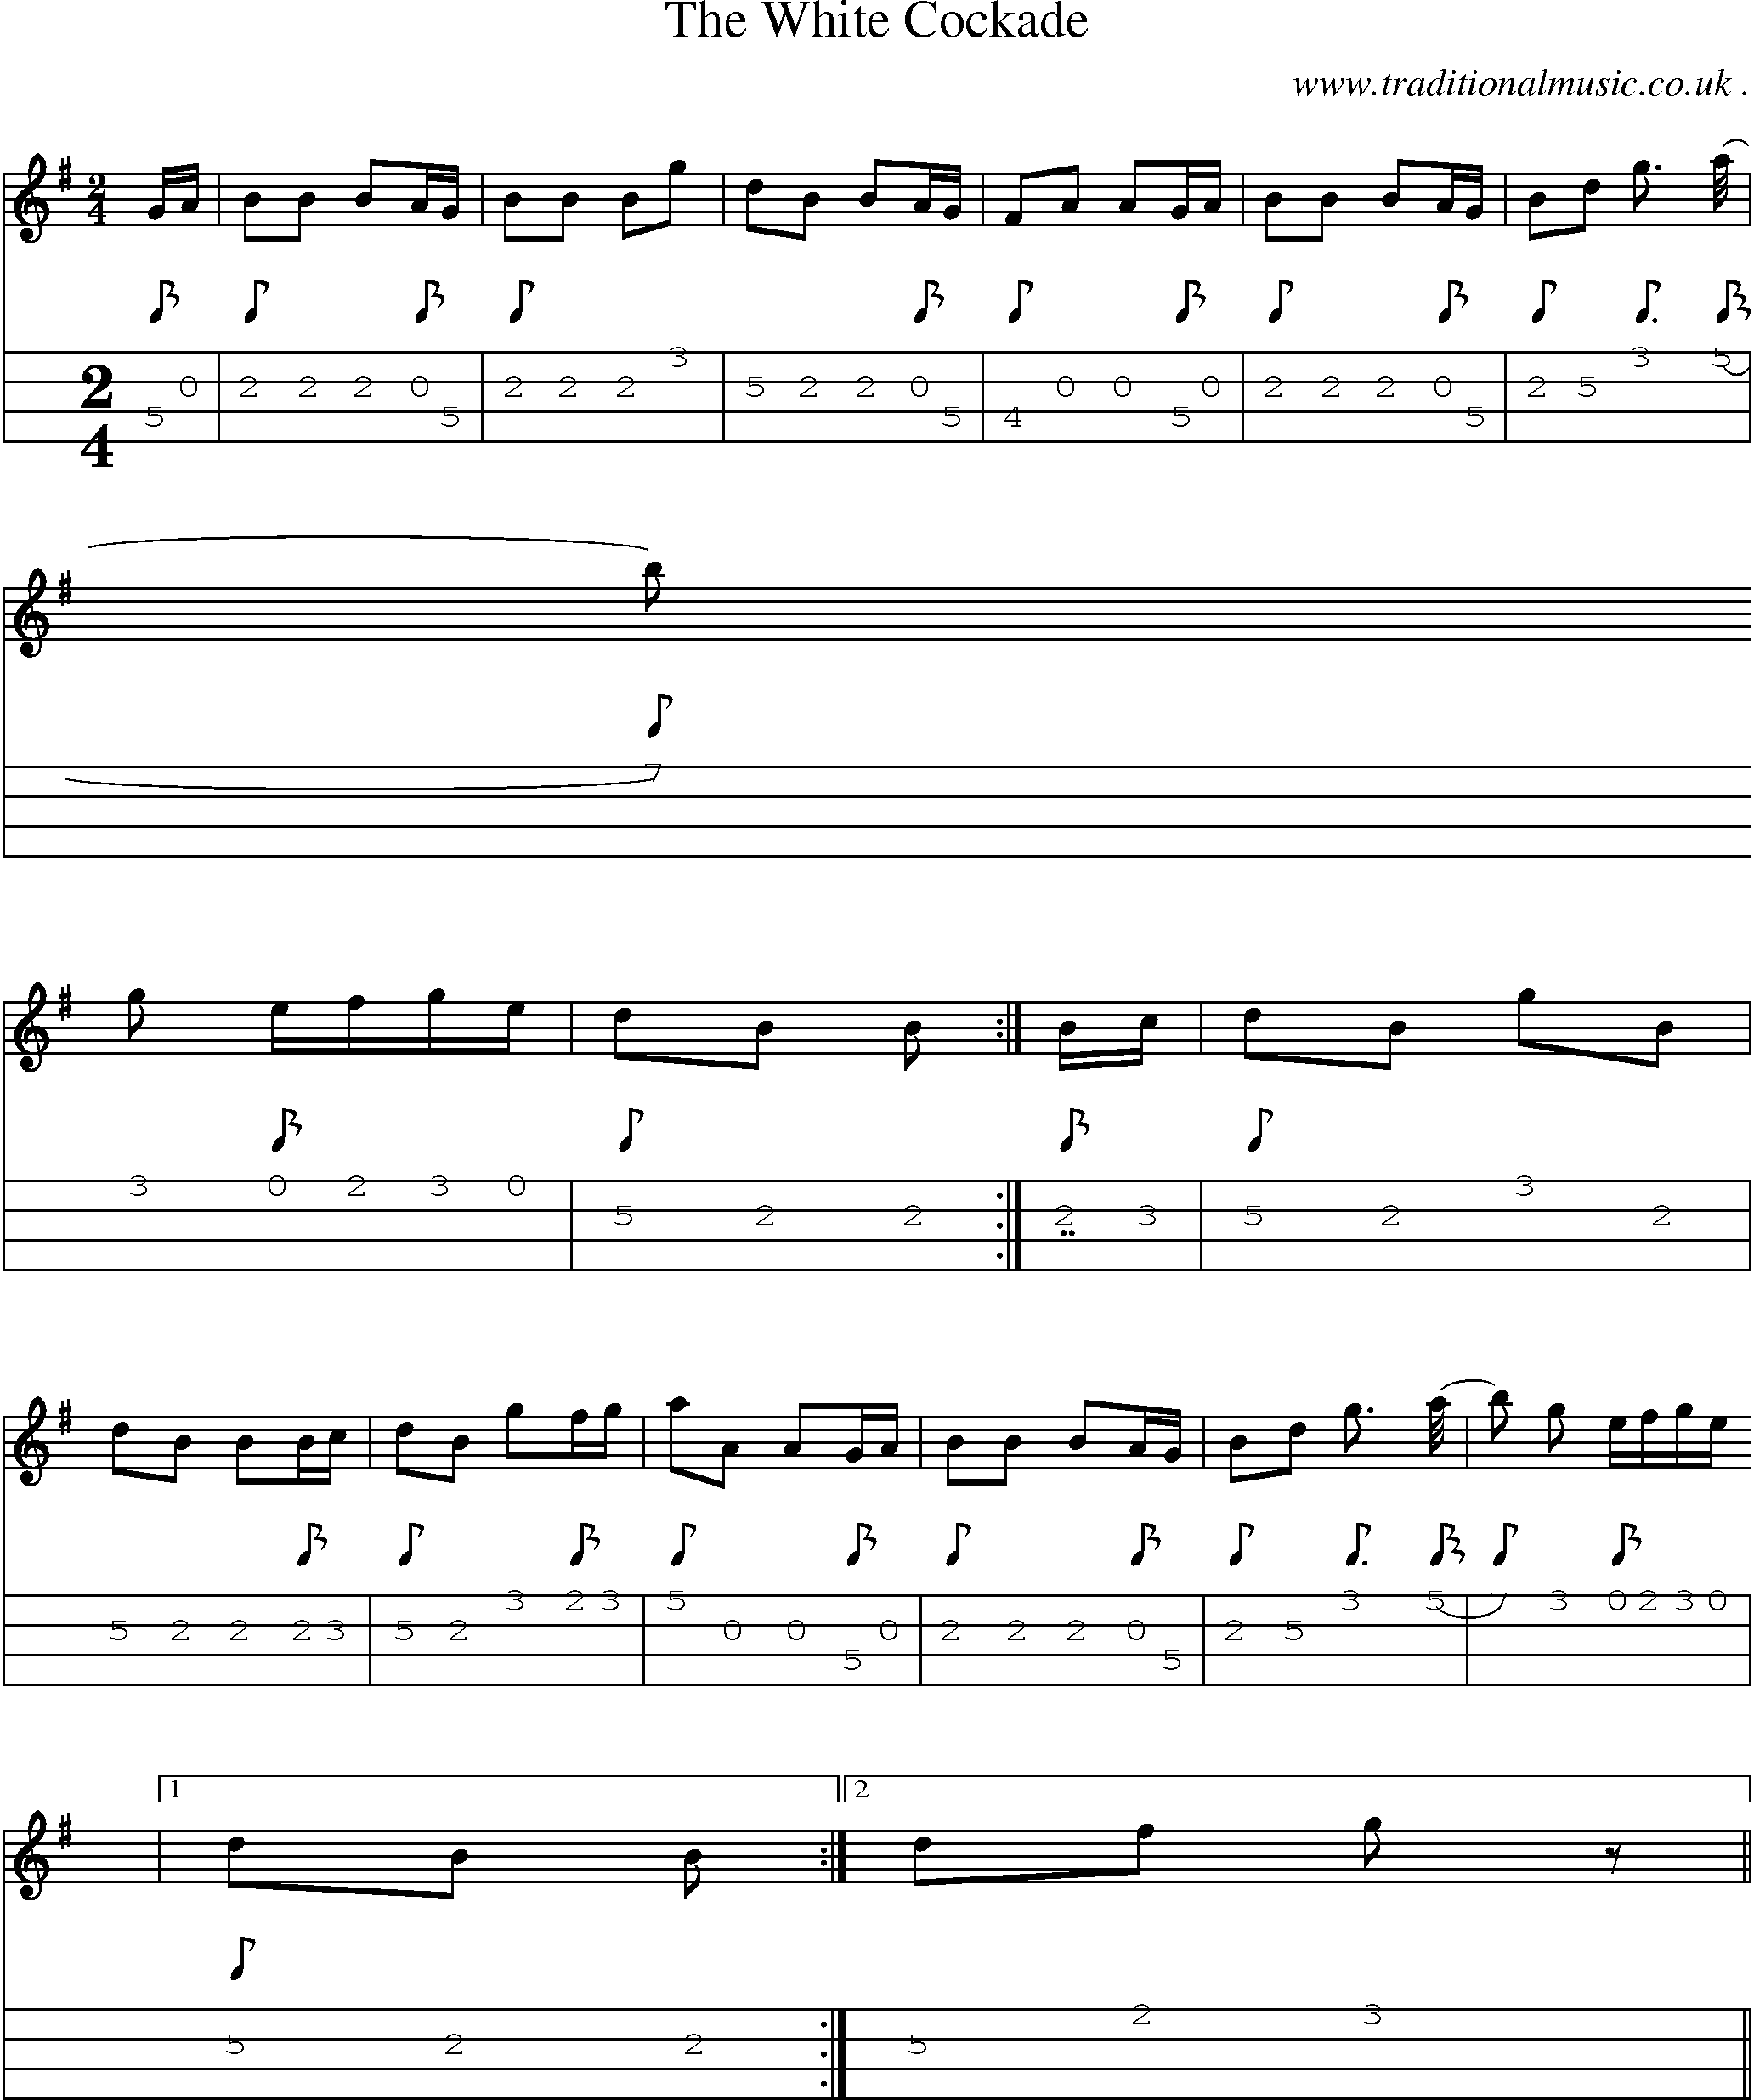 Music Score and Guitar Tabs for The White Cockade